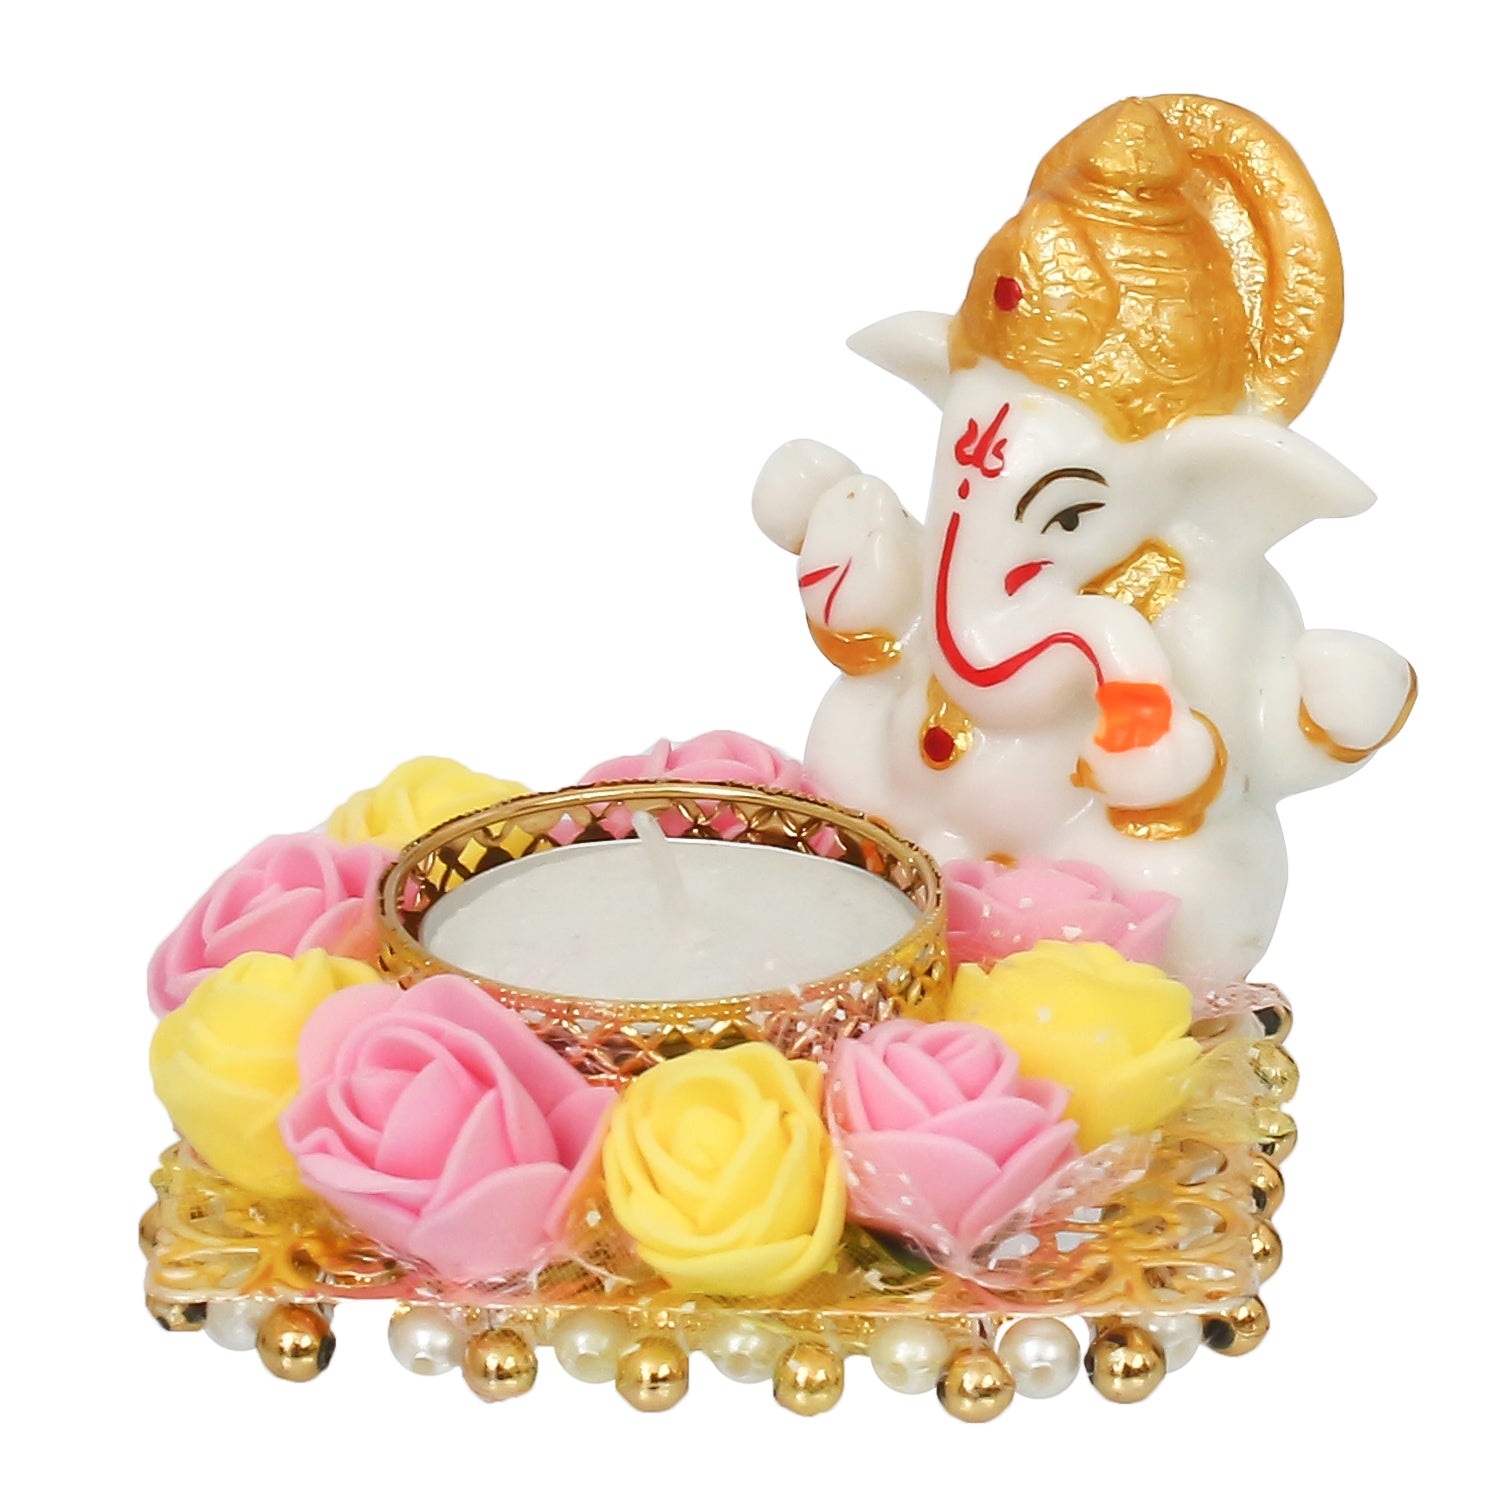 Polyresin Lord Ganesha Idol on Decorative Metal Plate with Tea Light Holder (Pink, Yellow and White) 4